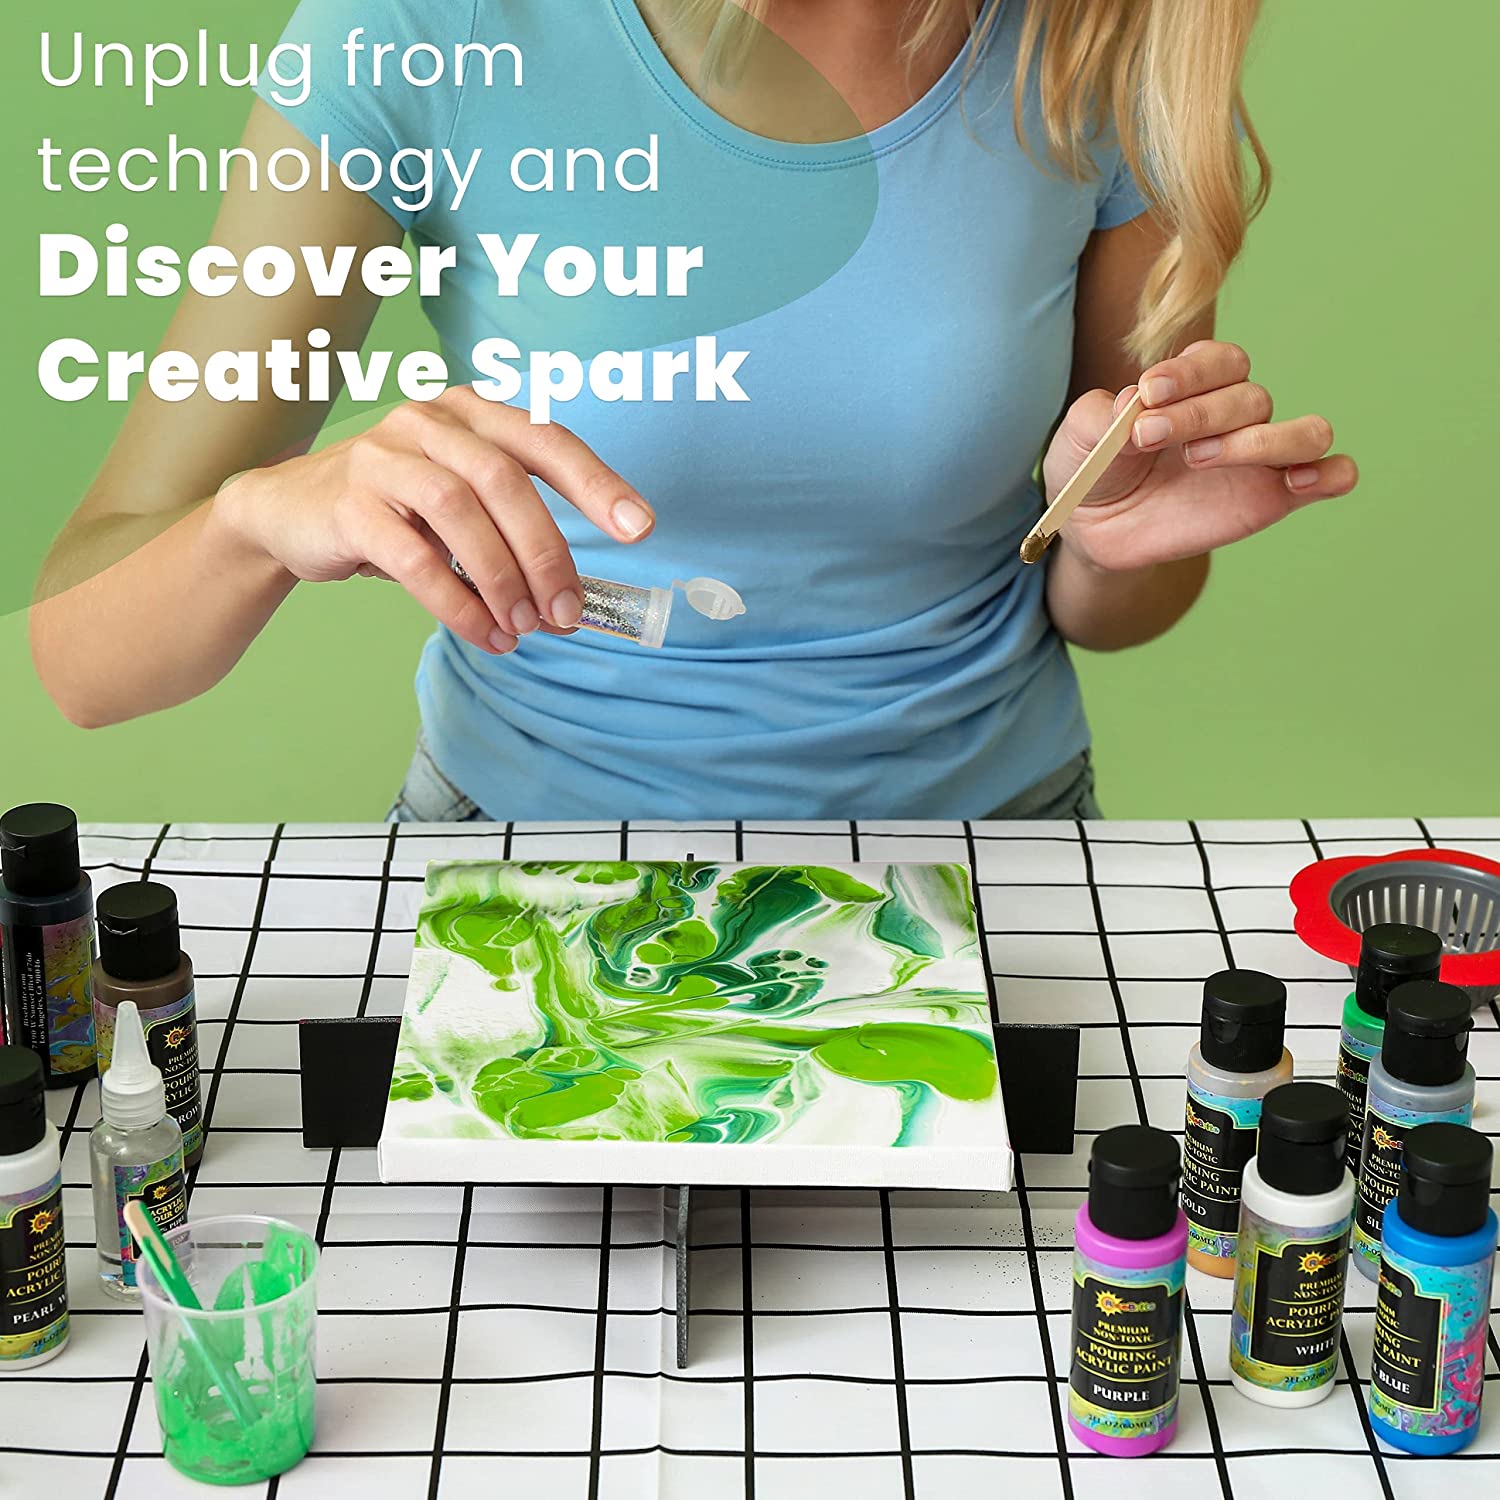 ACRYLIC PAINT POURING KIT UNBOXING - See what you get and what you